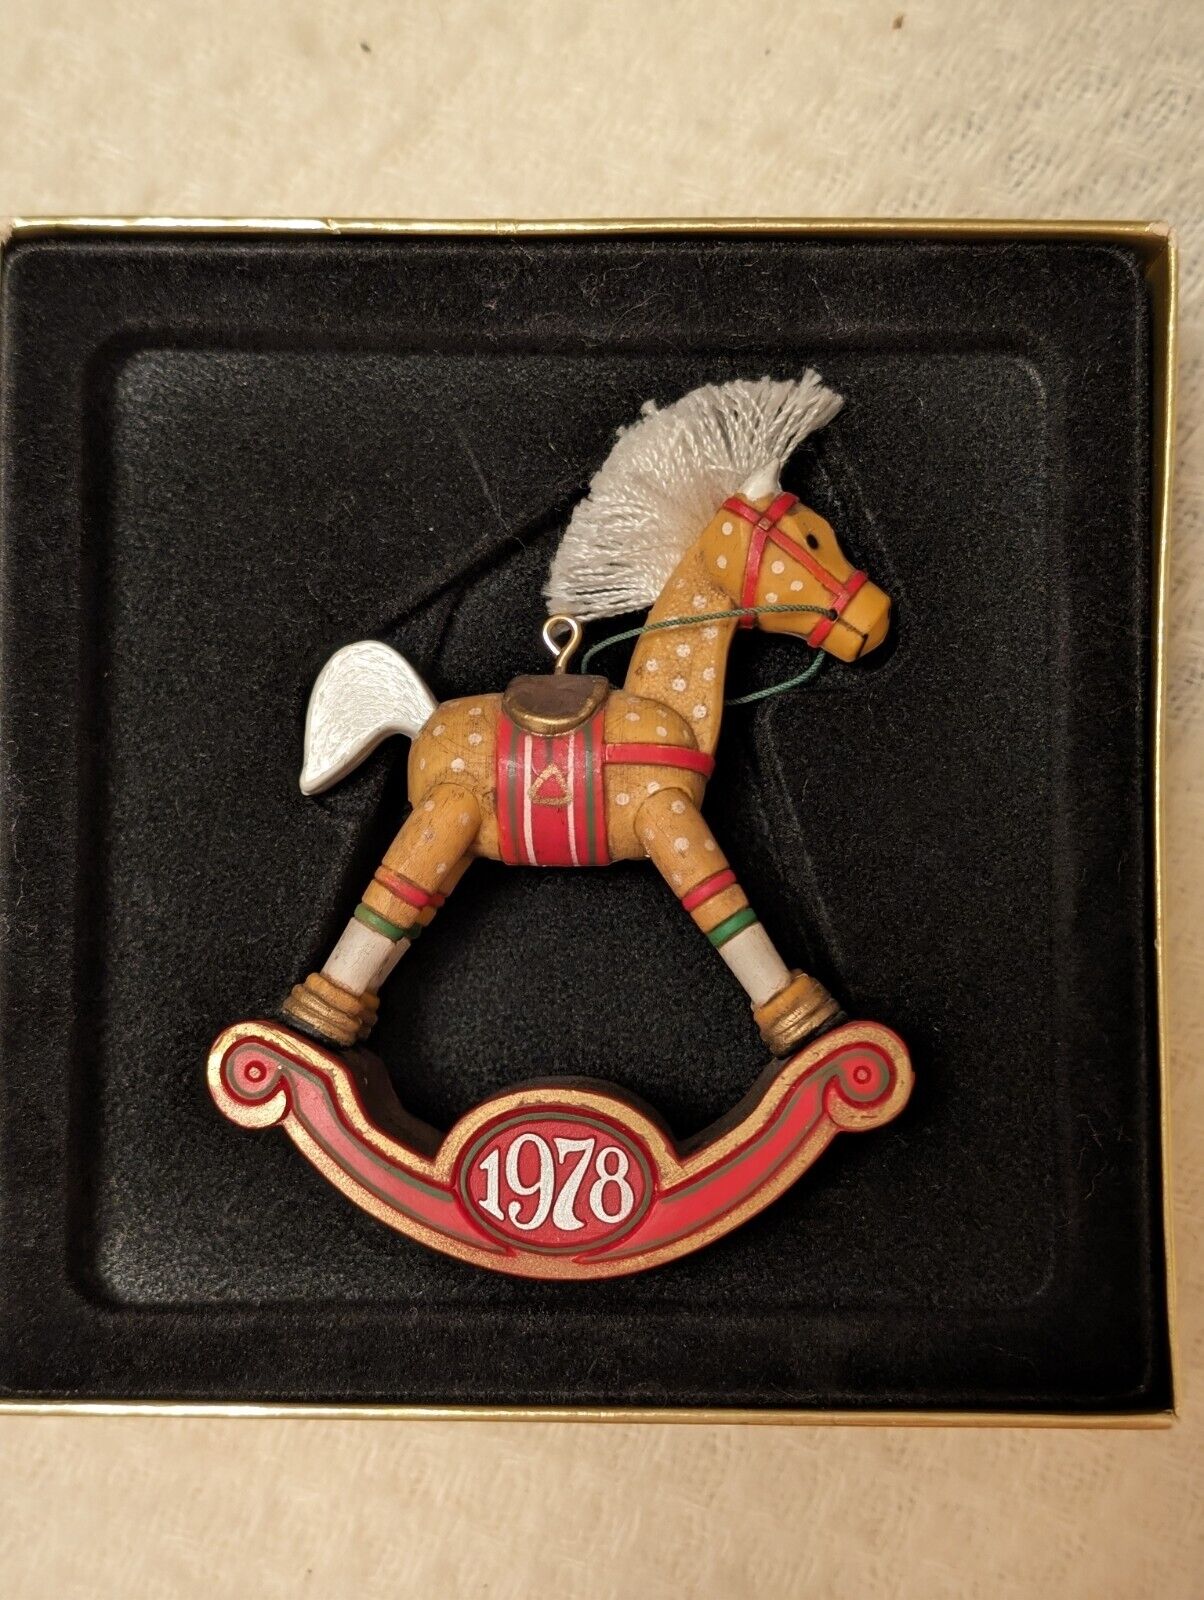 Hallmark Ornament ROCKING HORSE 1978 Christmas Vintage Tree Trimmer Collection